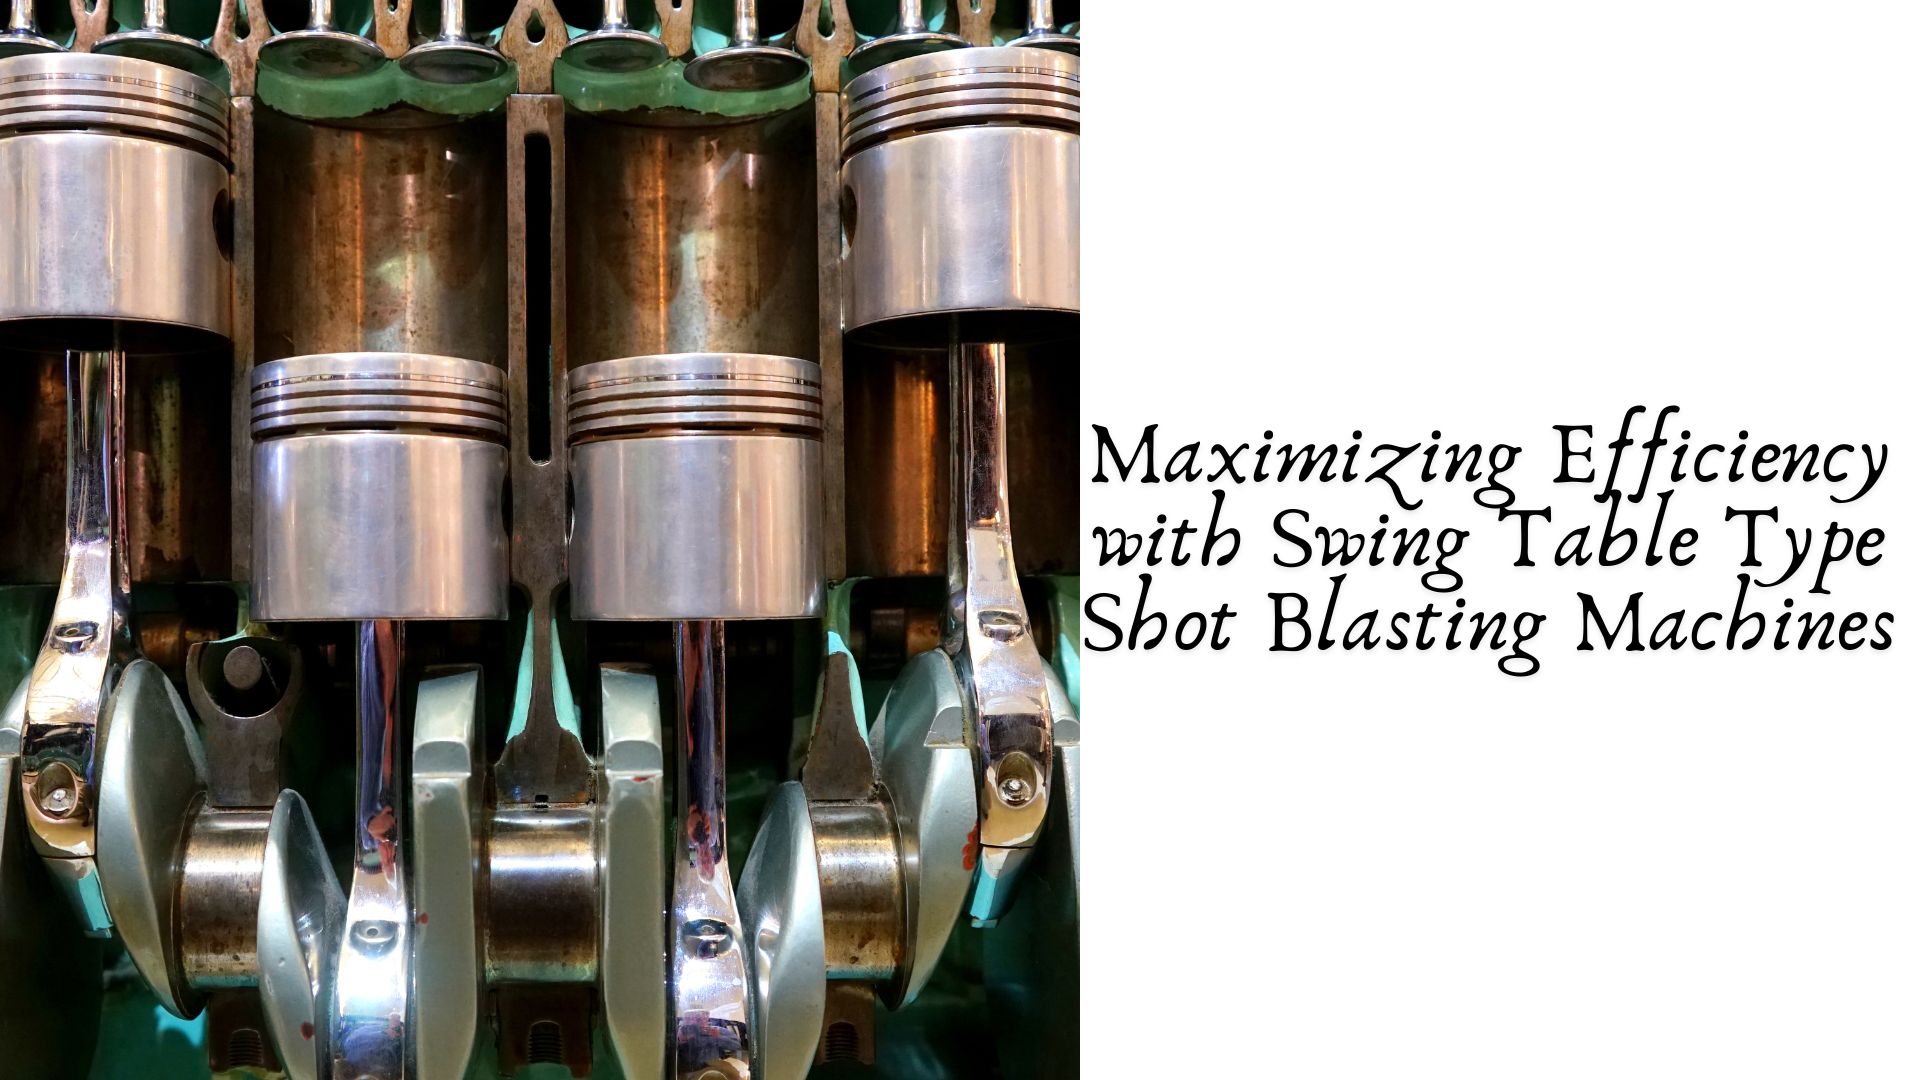 Maximizing Efficiency with Swing Table Type Shot Blasting Machines